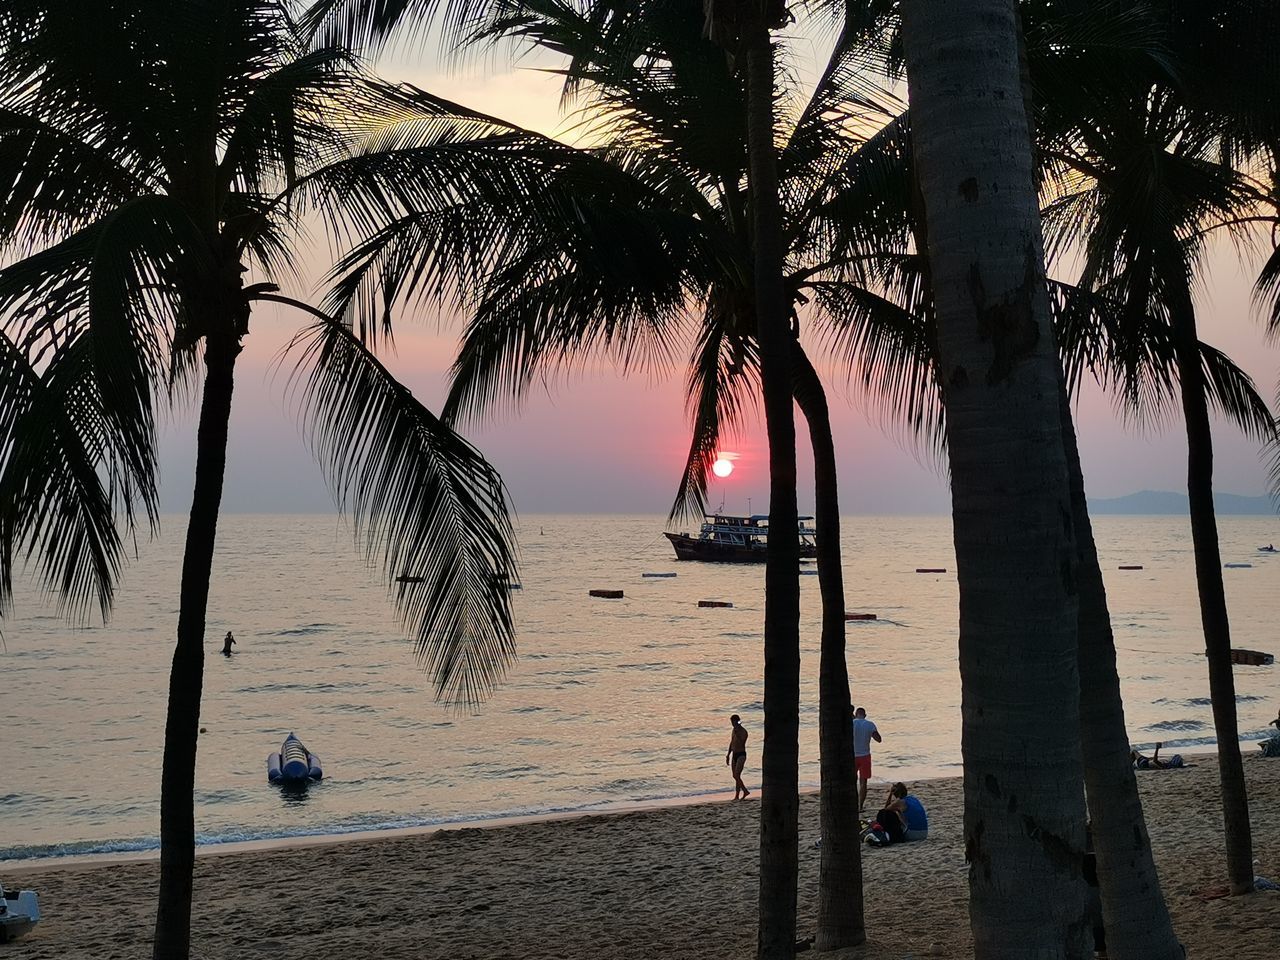 palm tree, beach, sea, water, tropical climate, tree, land, sky, nature, sunset, beauty in nature, plant, sand, tranquility, scenics - nature, holiday, vacation, ocean, trip, travel destinations, tranquil scene, coconut palm tree, evening, horizon over water, dusk, idyllic, travel, silhouette, tropical tree, body of water, horizon, outdoors, tropics, sunlight, relaxation, tourism, tree trunk, sun, trunk, leisure activity, coast, island, environment, no people, transportation, summer